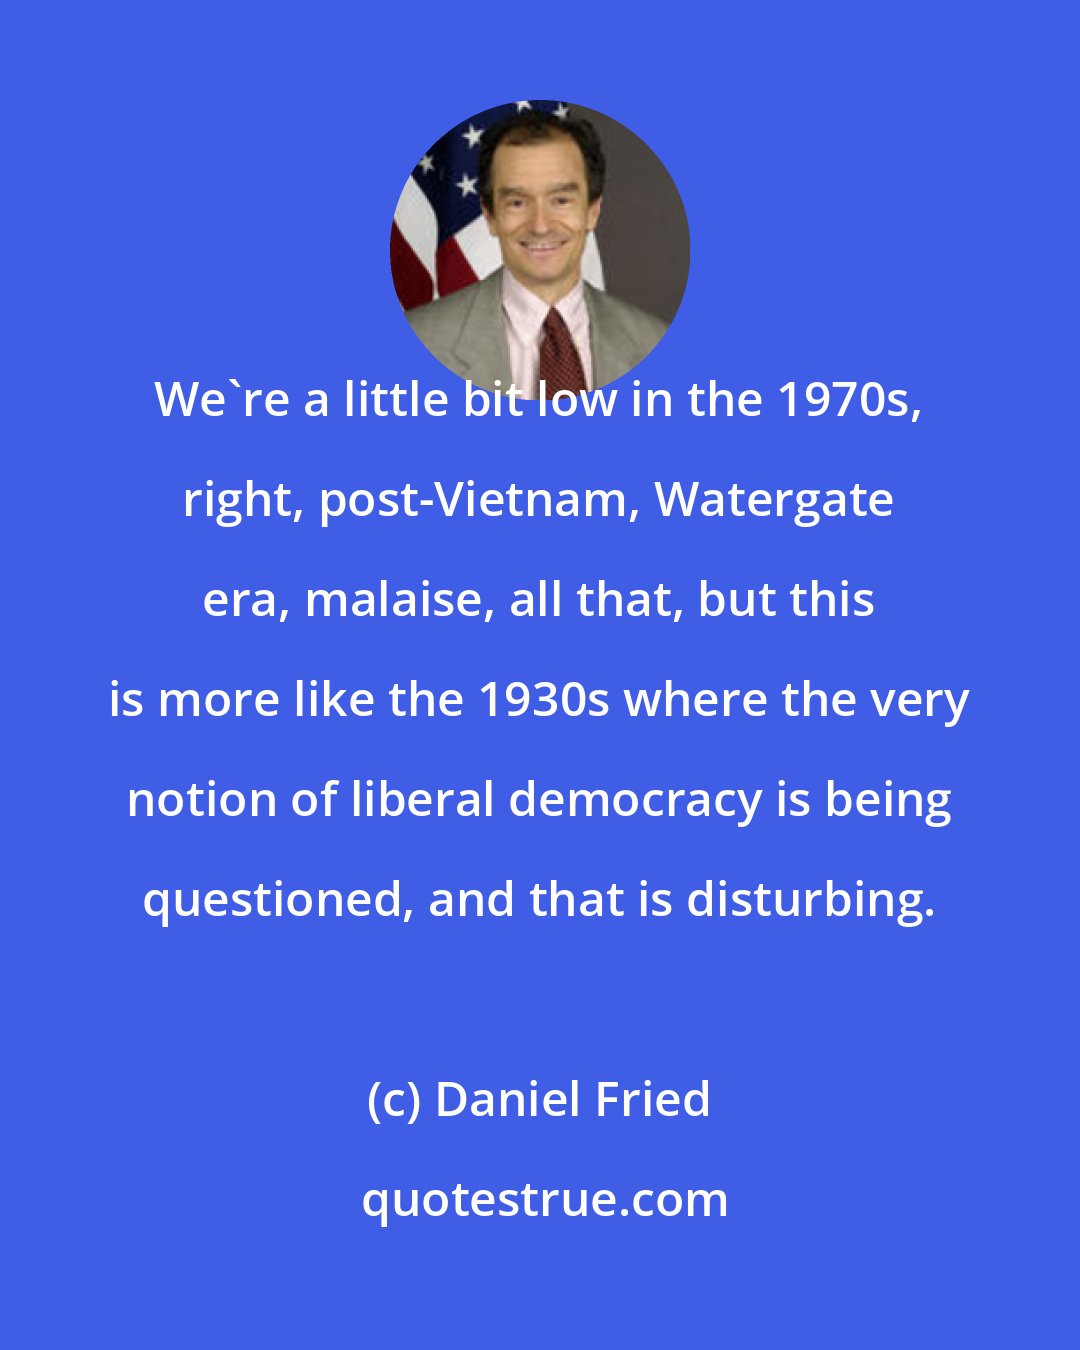 Daniel Fried: We`re a little bit low in the 1970s, right, post-Vietnam, Watergate era, malaise, all that, but this is more like the 1930s where the very notion of liberal democracy is being questioned, and that is disturbing.